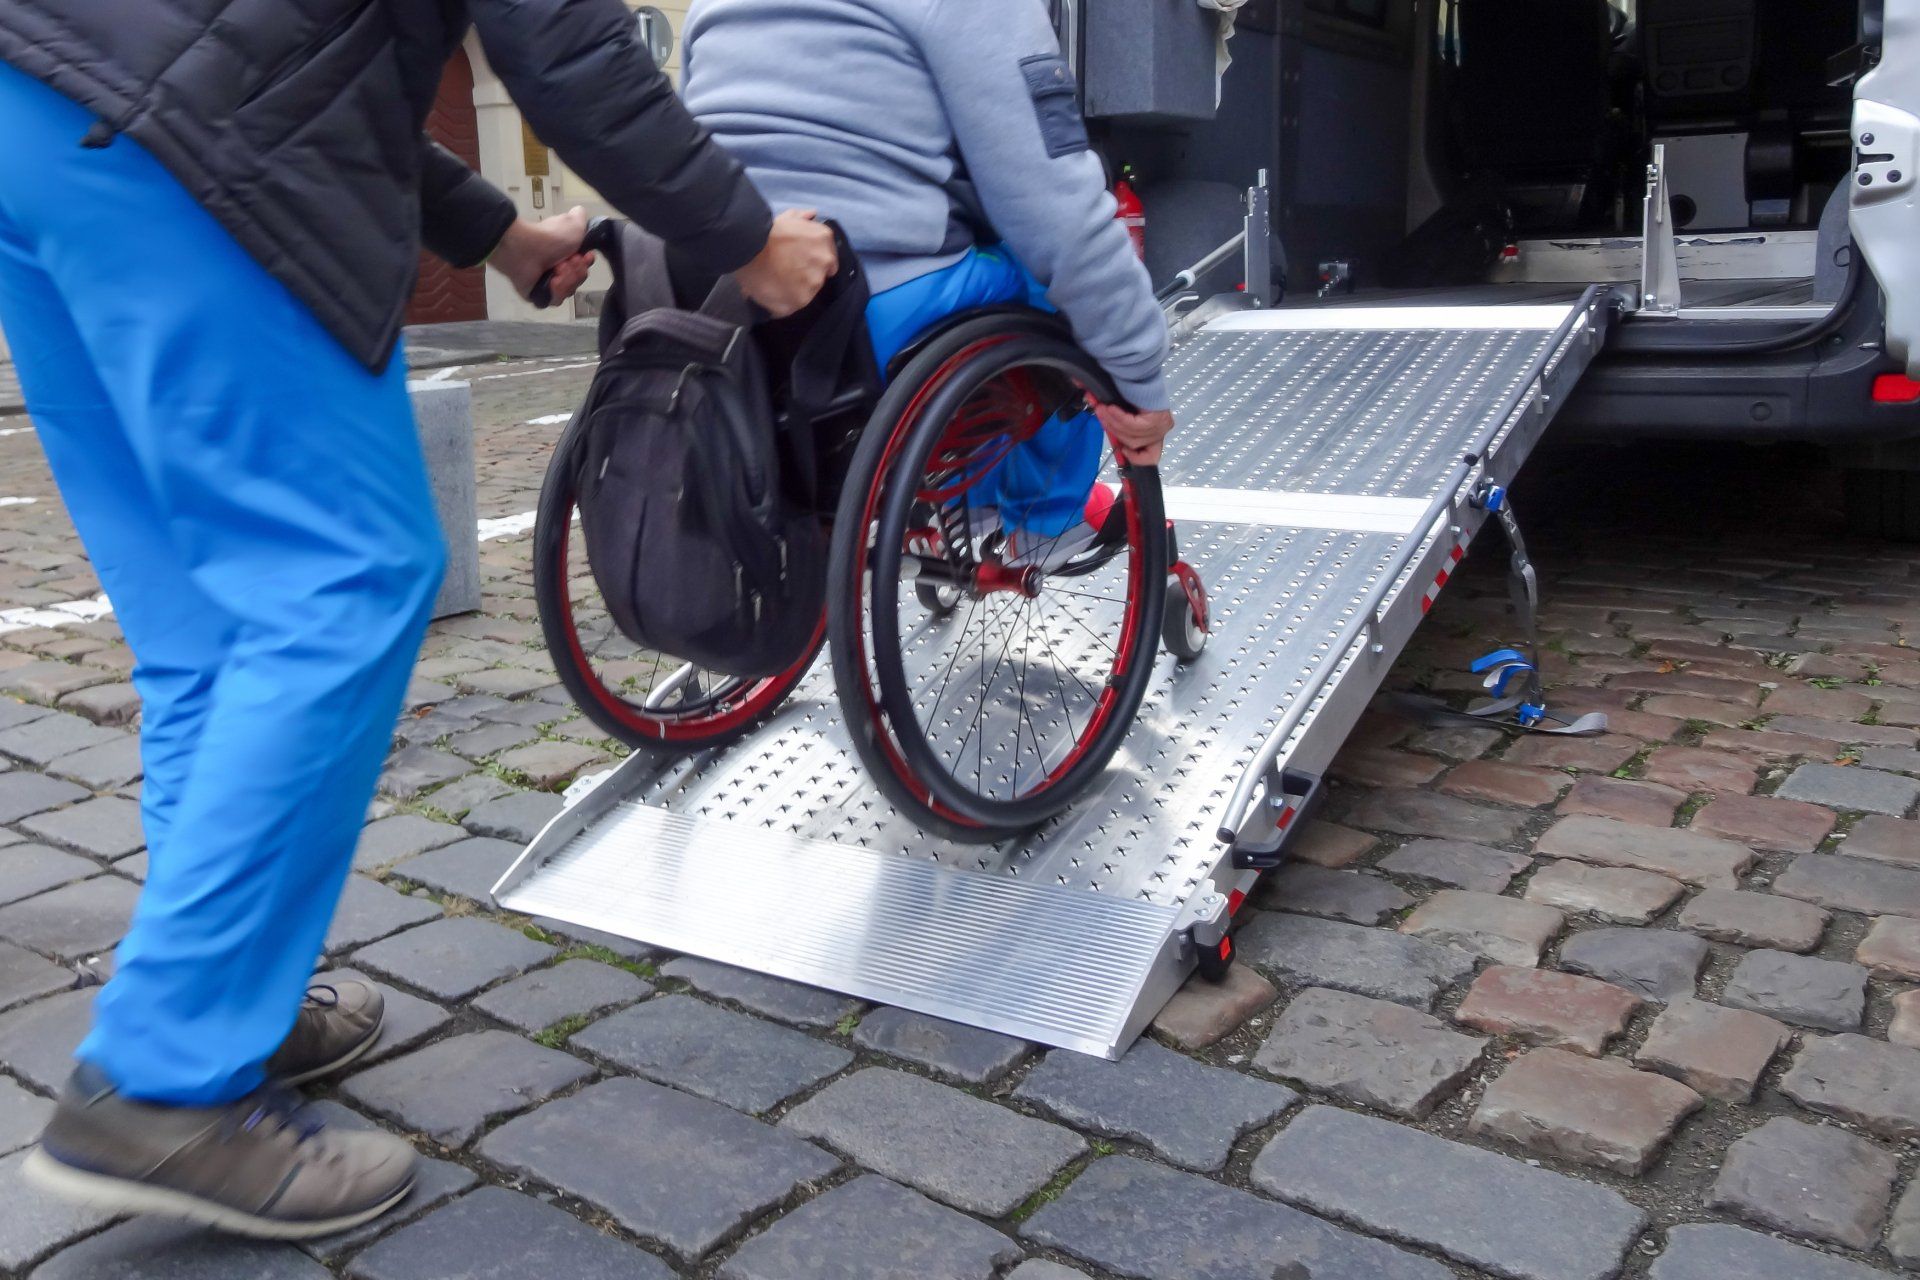 Person in wheelchair using car lift